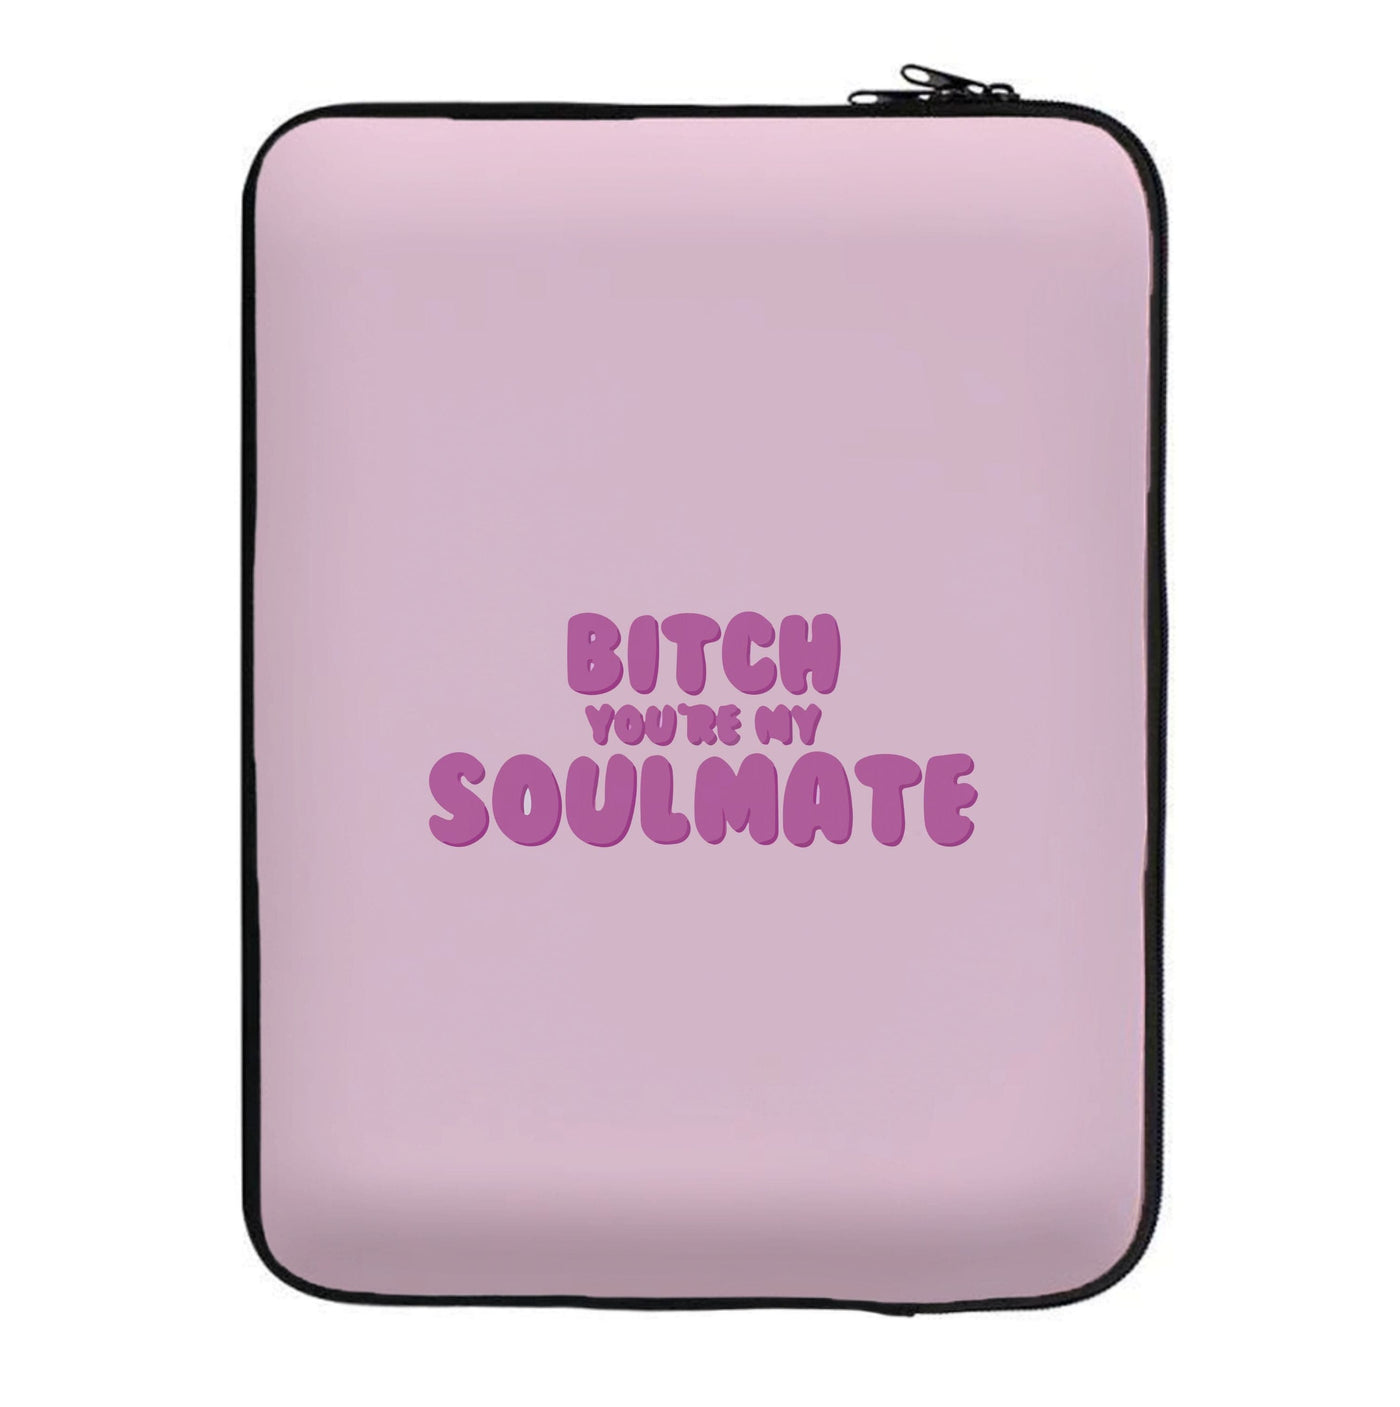 Bitch You're My Soulmate - Euphoria Laptop Sleeve